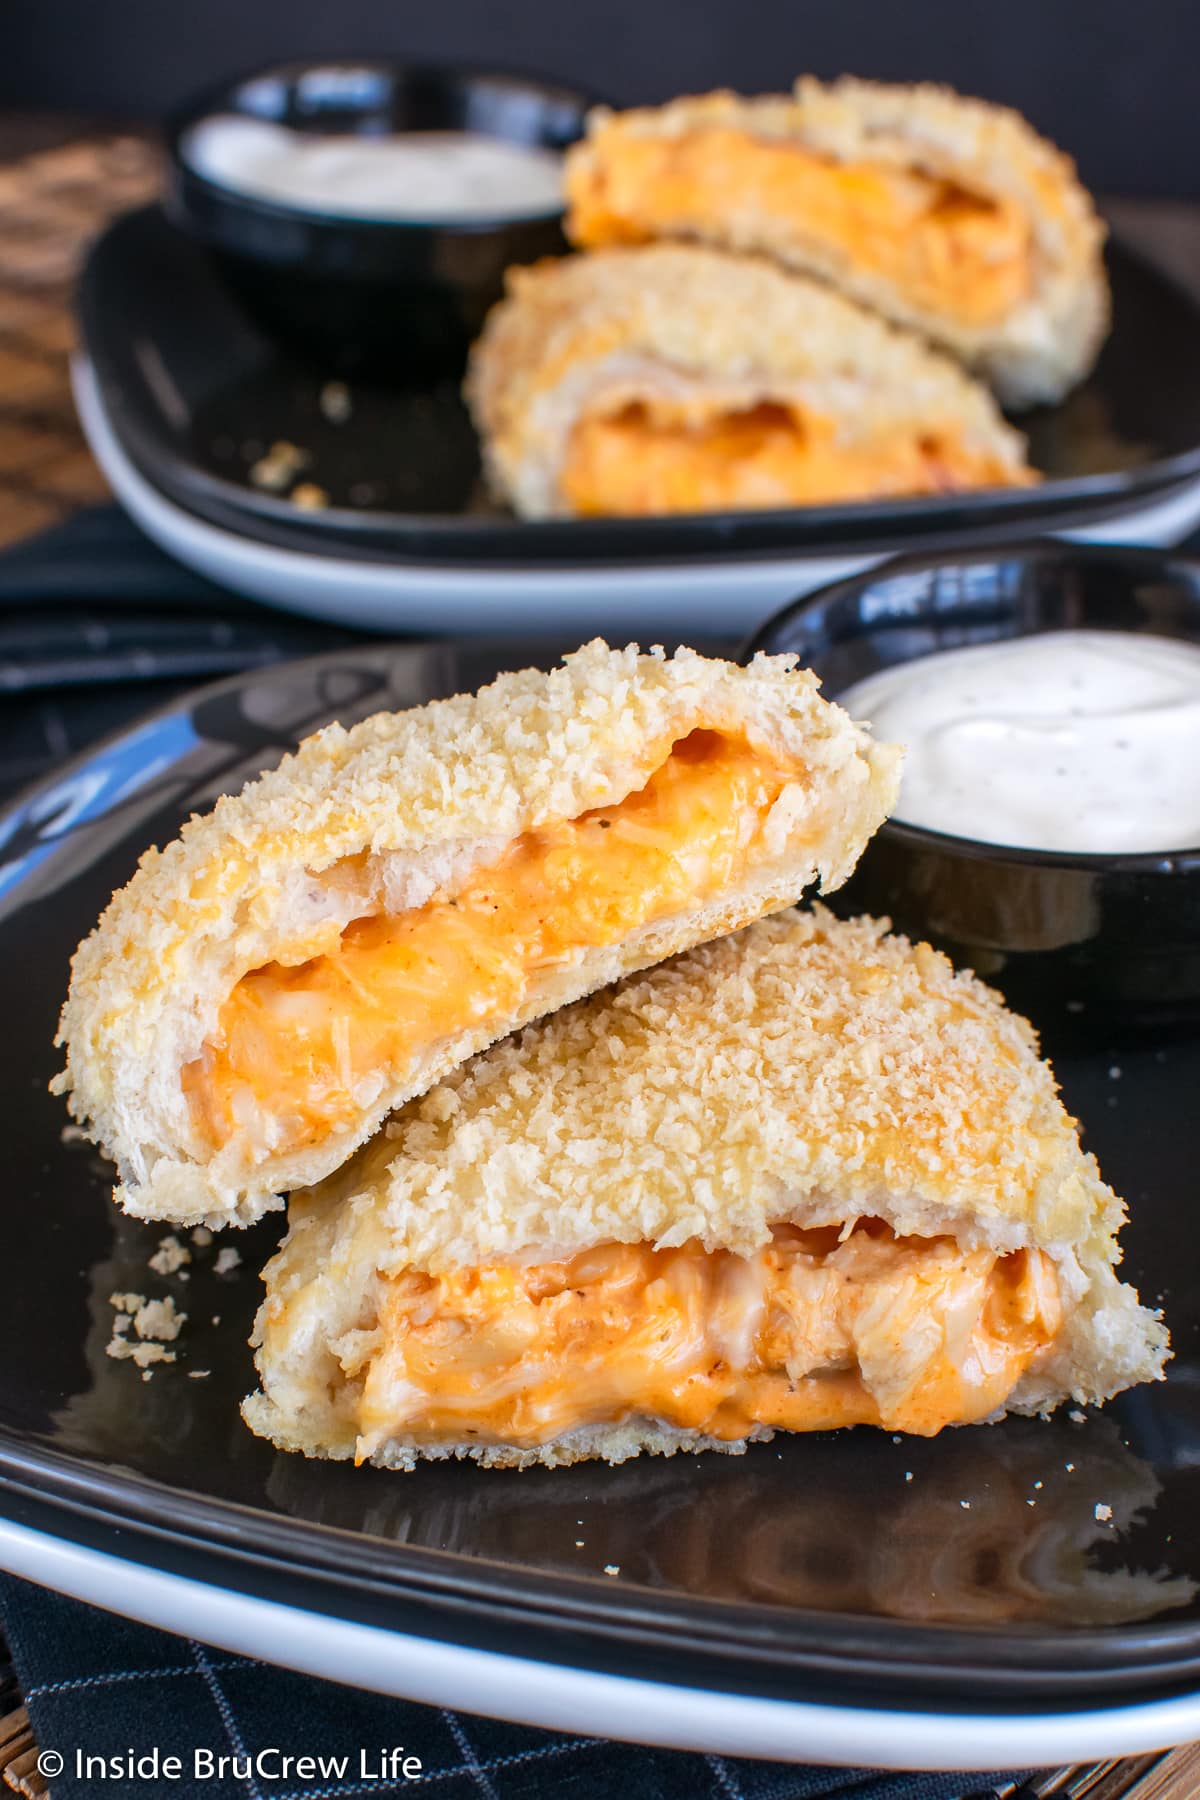 A biscuit stuffed with melted cheese and spicy chicken.